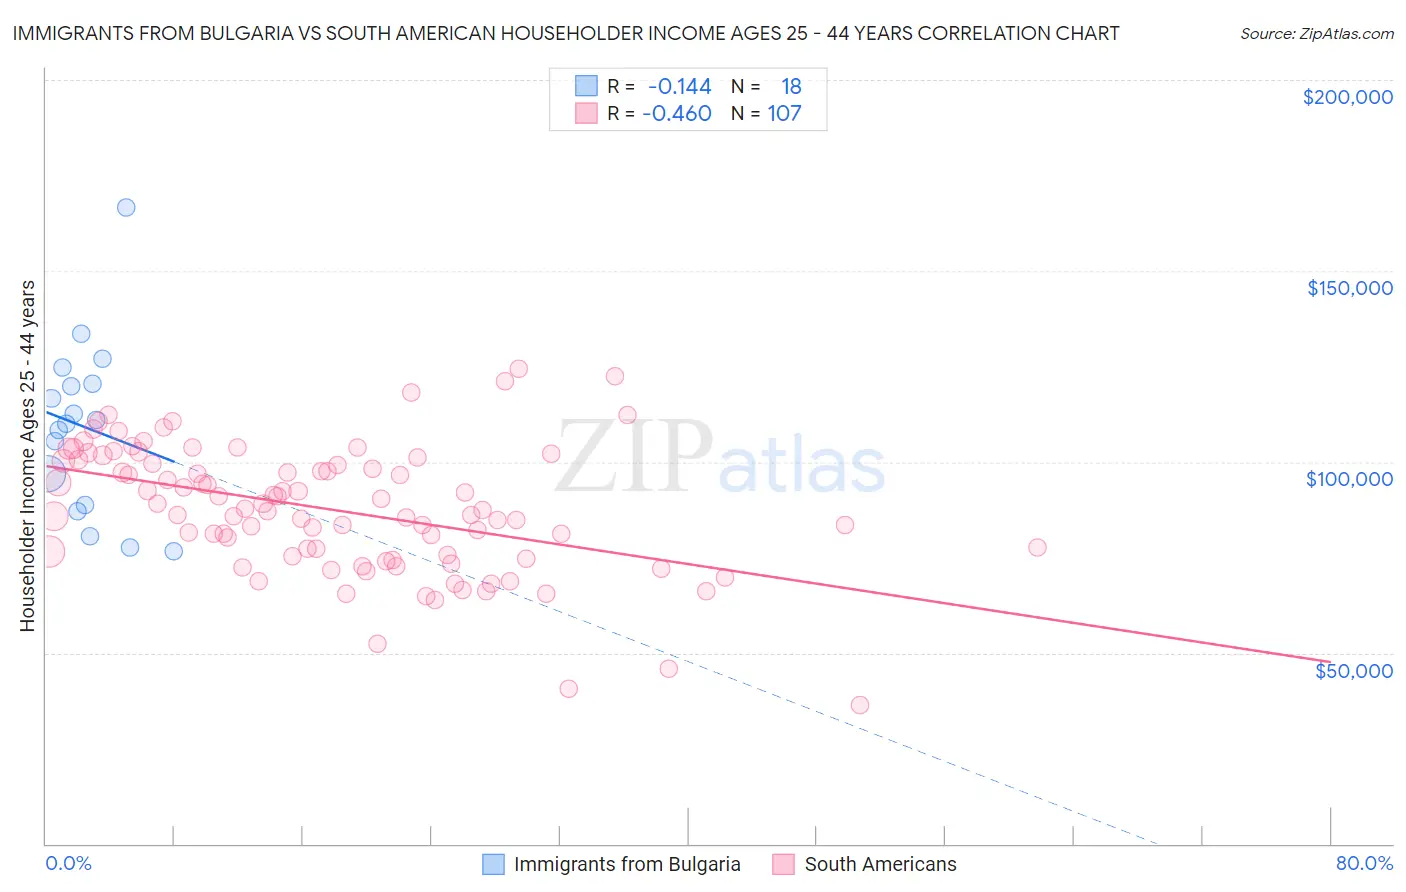 Immigrants from Bulgaria vs South American Householder Income Ages 25 - 44 years